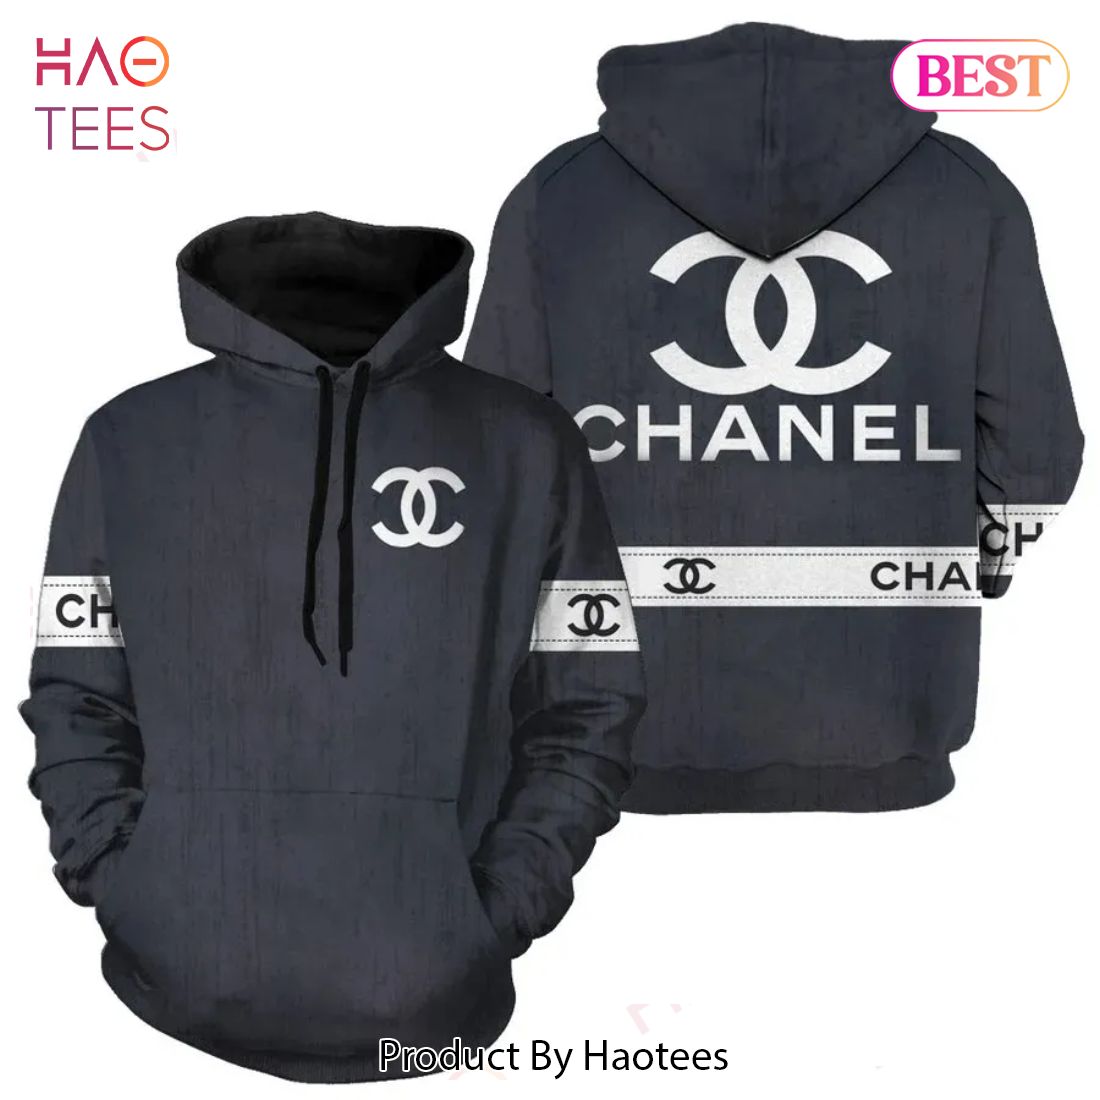 Chanel Unisex Hoodie For Men Women Luxury Brand Clothing Clothes Outfit